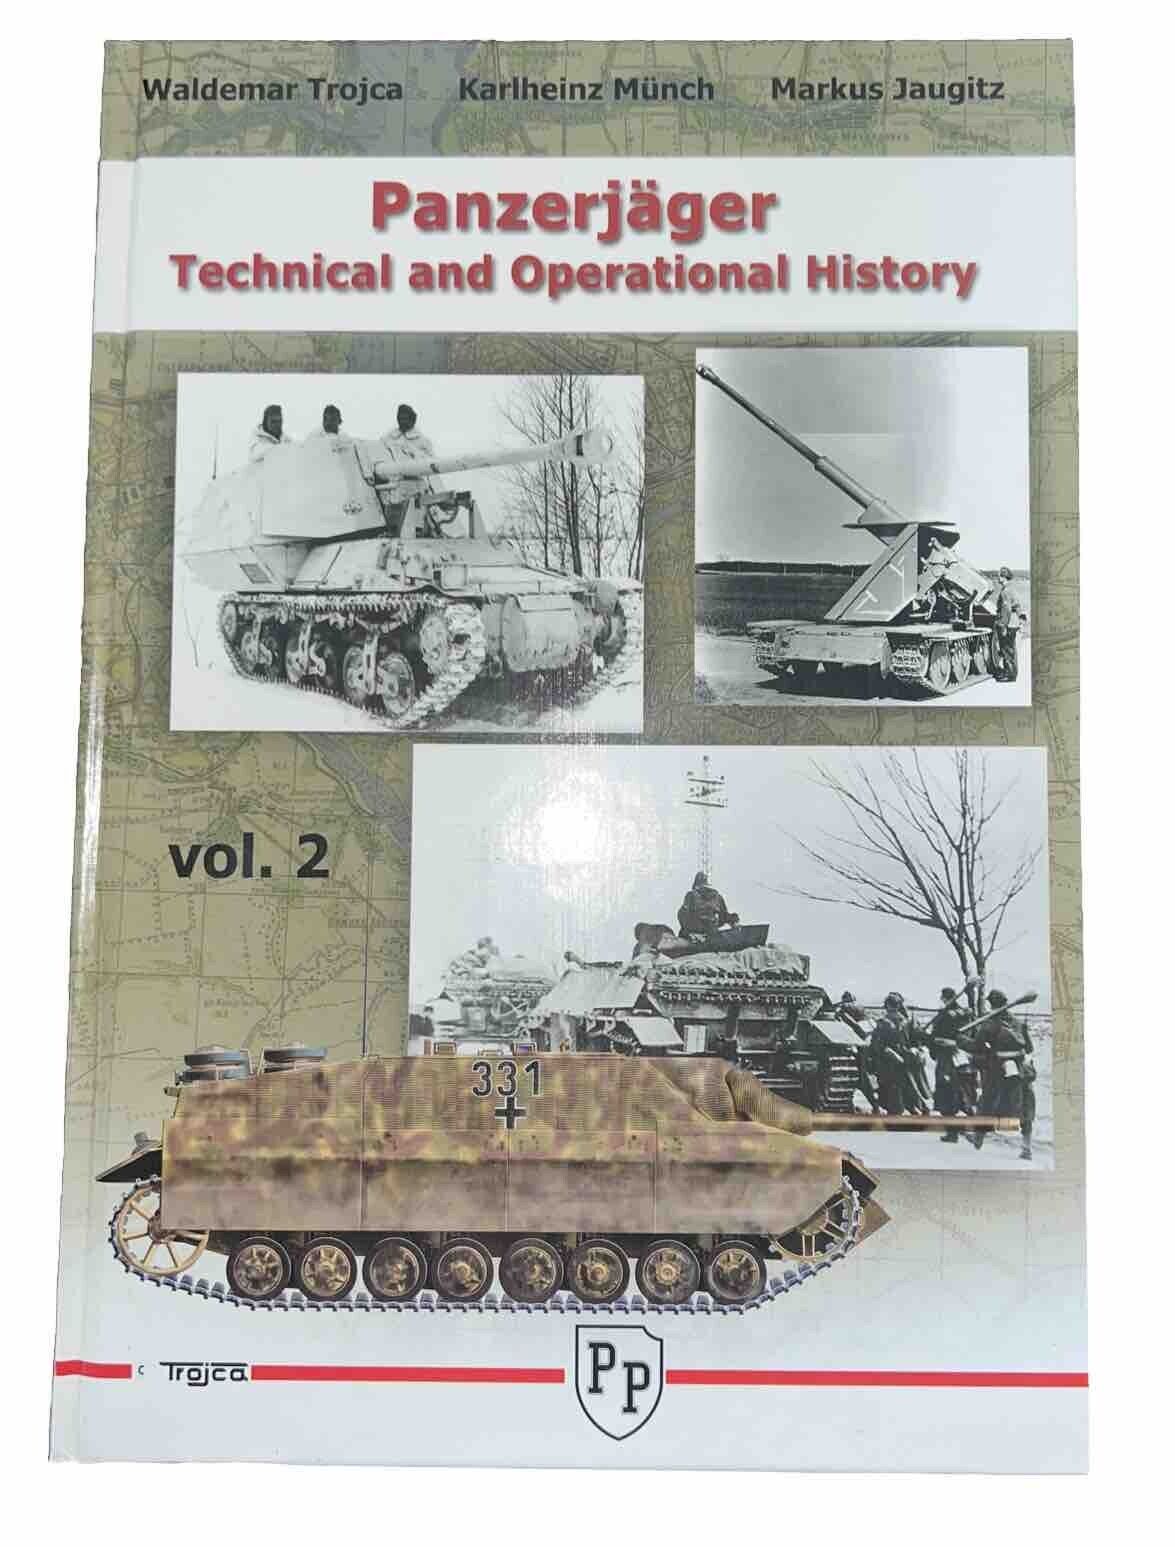 WW2 German Panzerjager Technical Operational History Vol 1 HC Reference Book